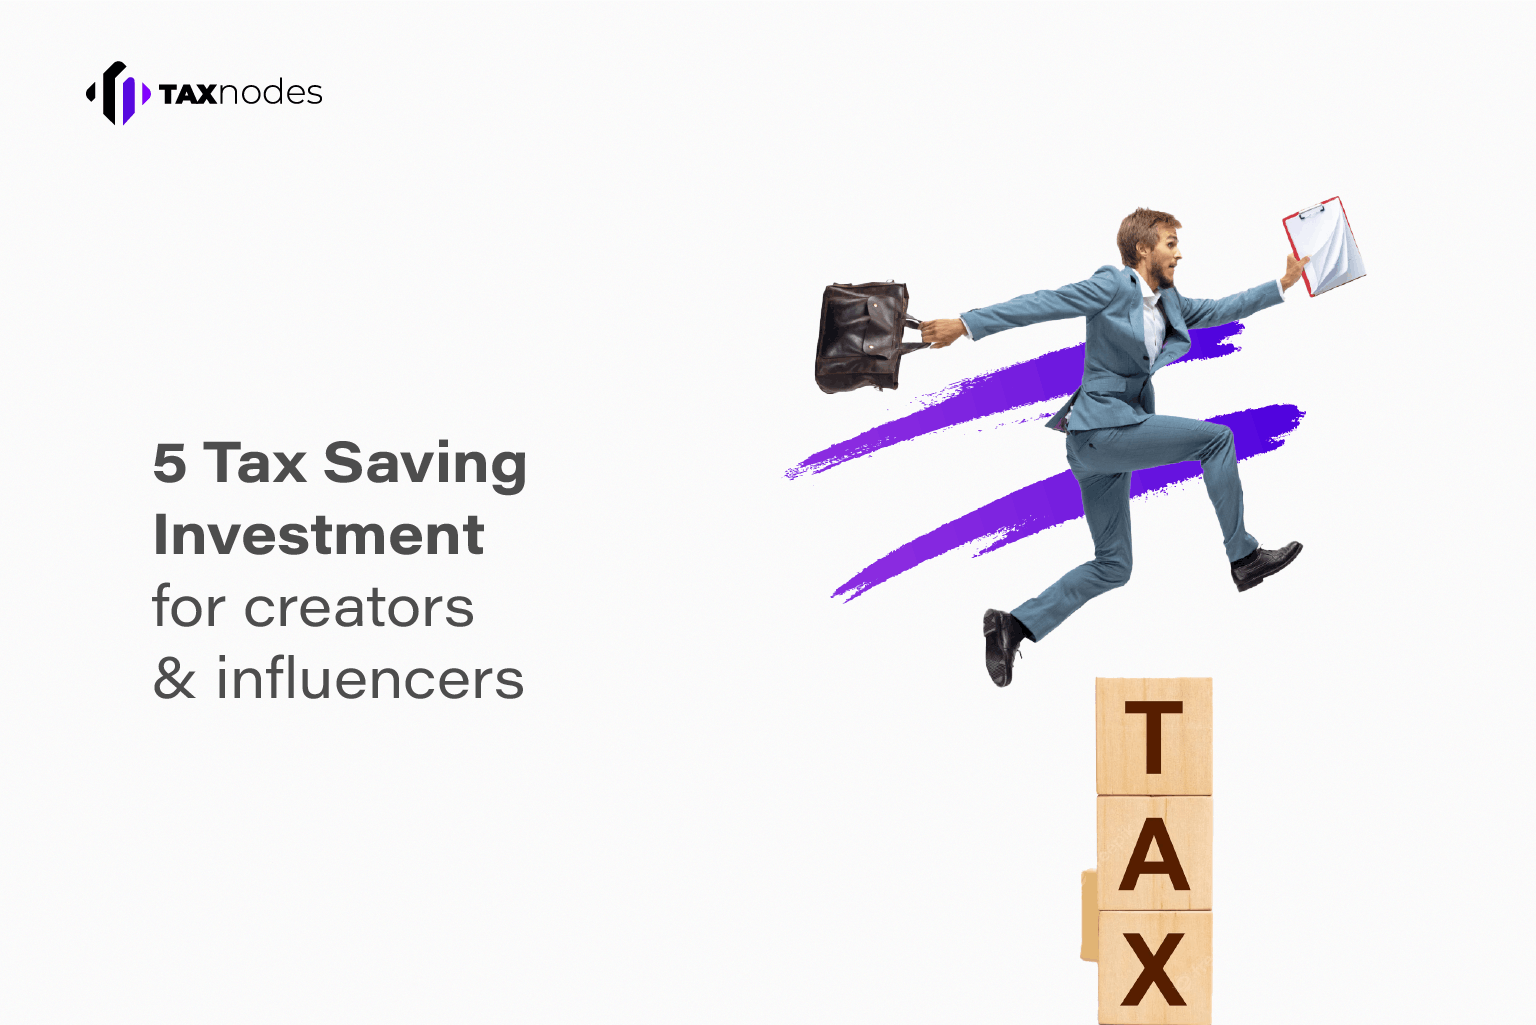 5 tax saving investment options for creators and influencers